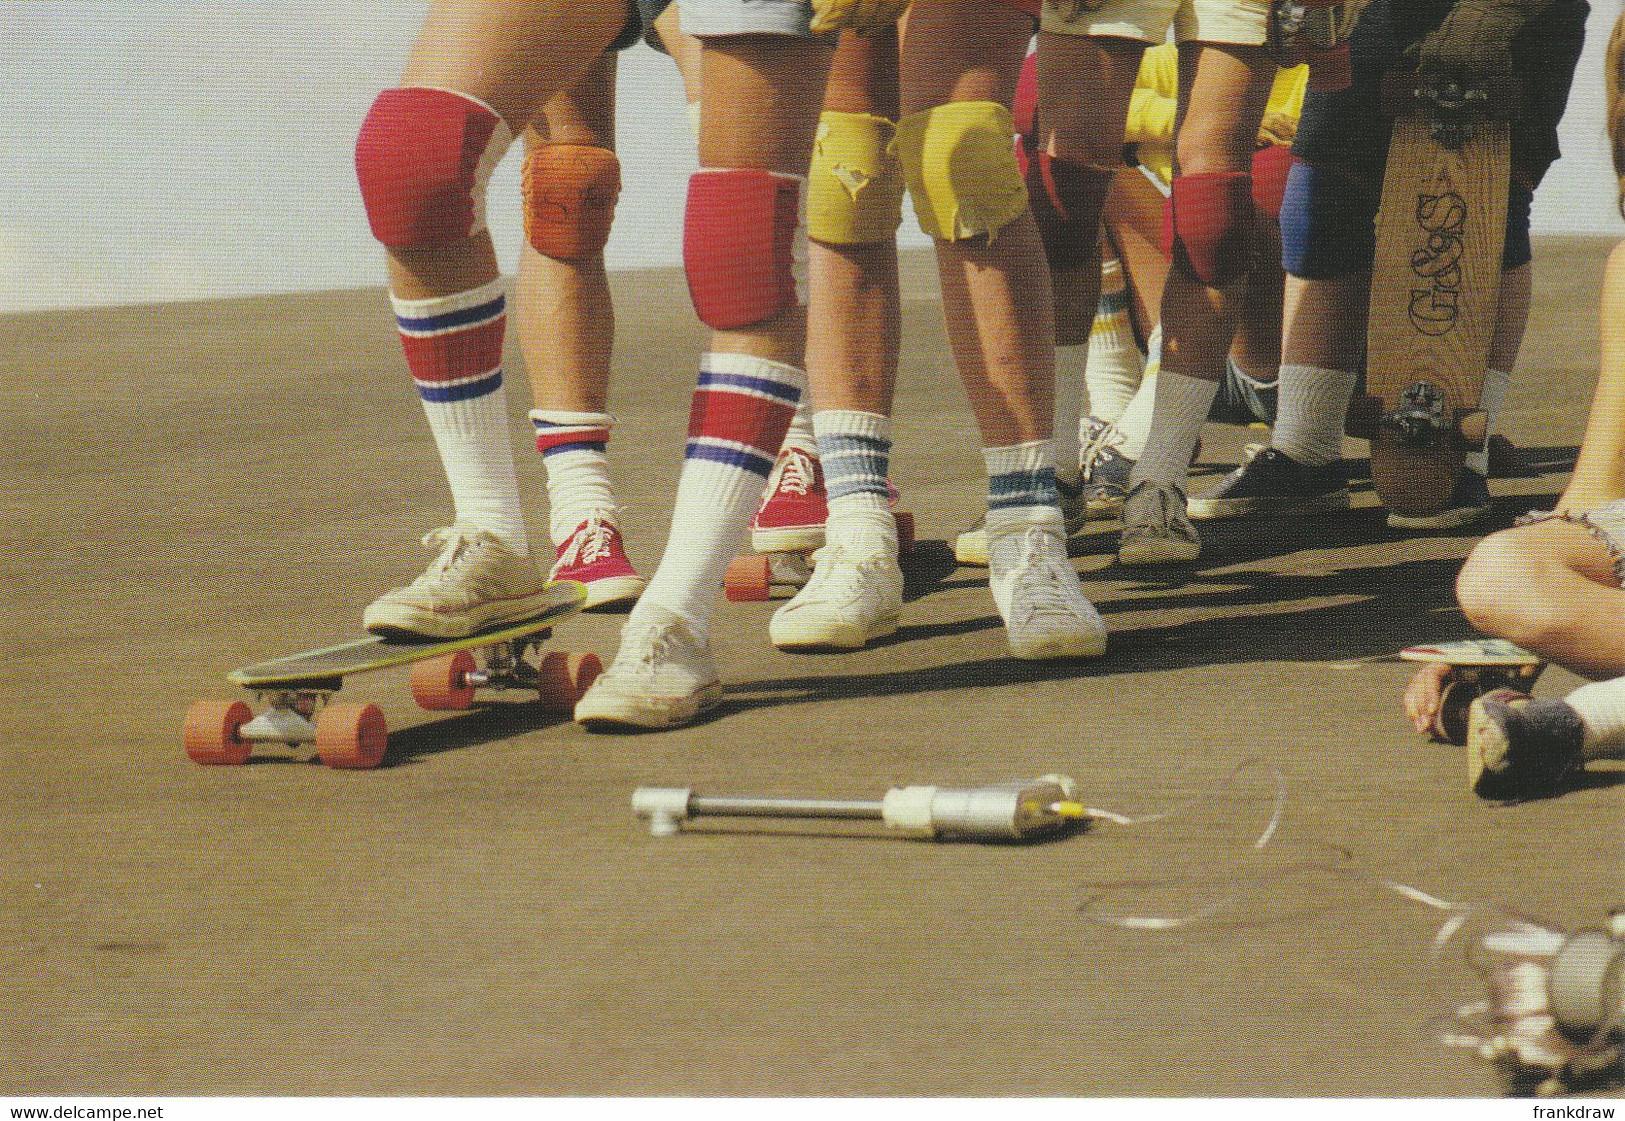 Postcard - Skate Boarding In The Seventies By H. Holland - Legs Eleven - New - Skateboard